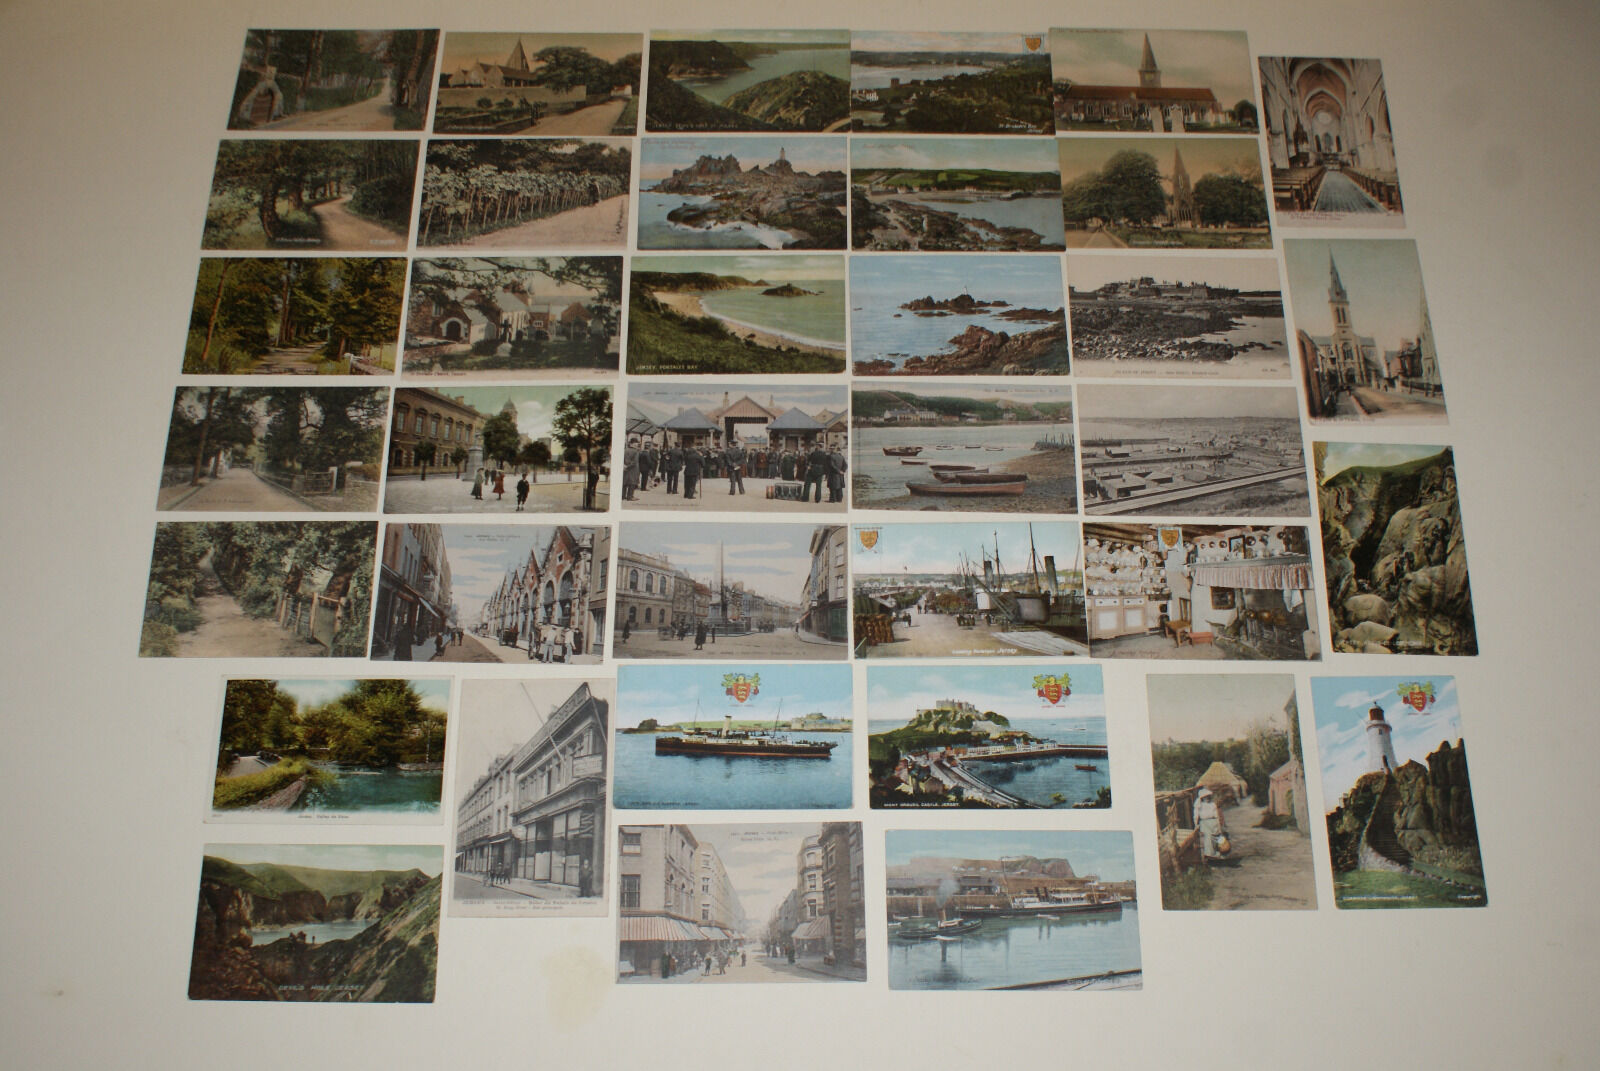 CHANNEL ISLAND POSCARDS - JERSEY - LOT OF 37 ANTIQUE POSTCARDS CIRCA 1900